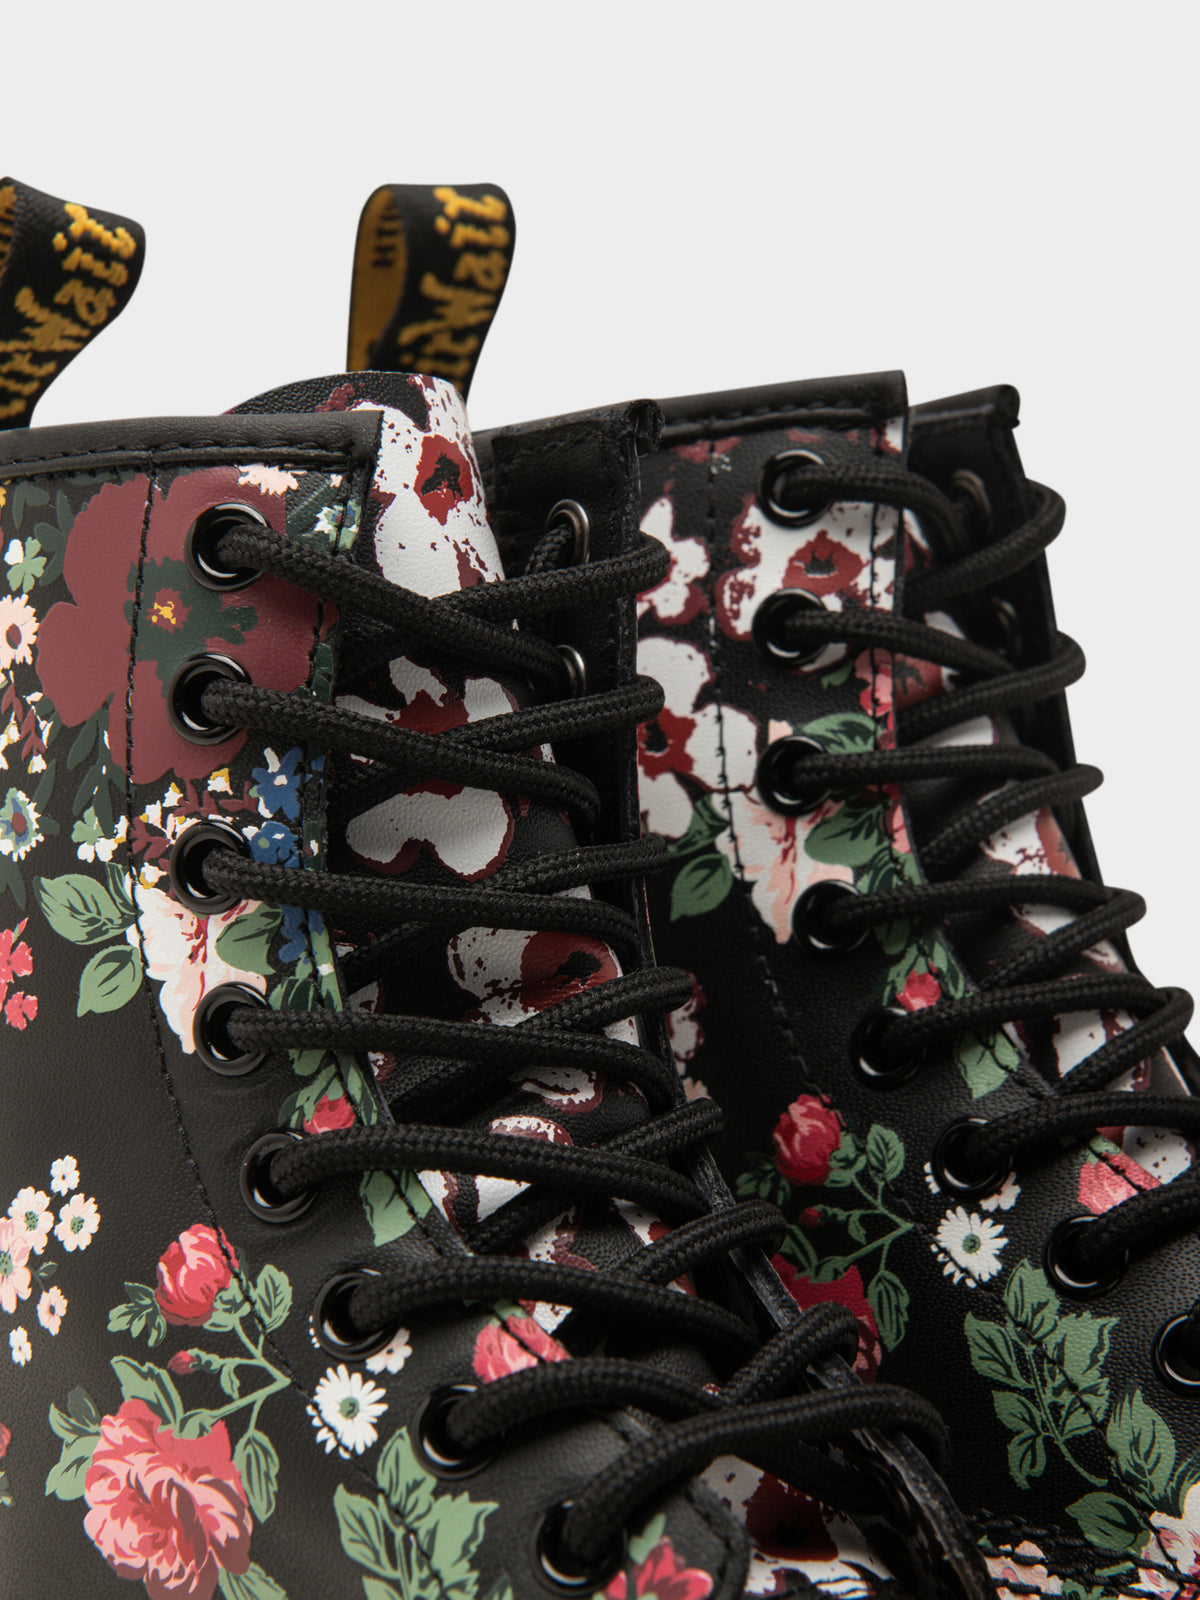 Womens 1460 Pascal 8 Eyelet Boot in Floral Mashup